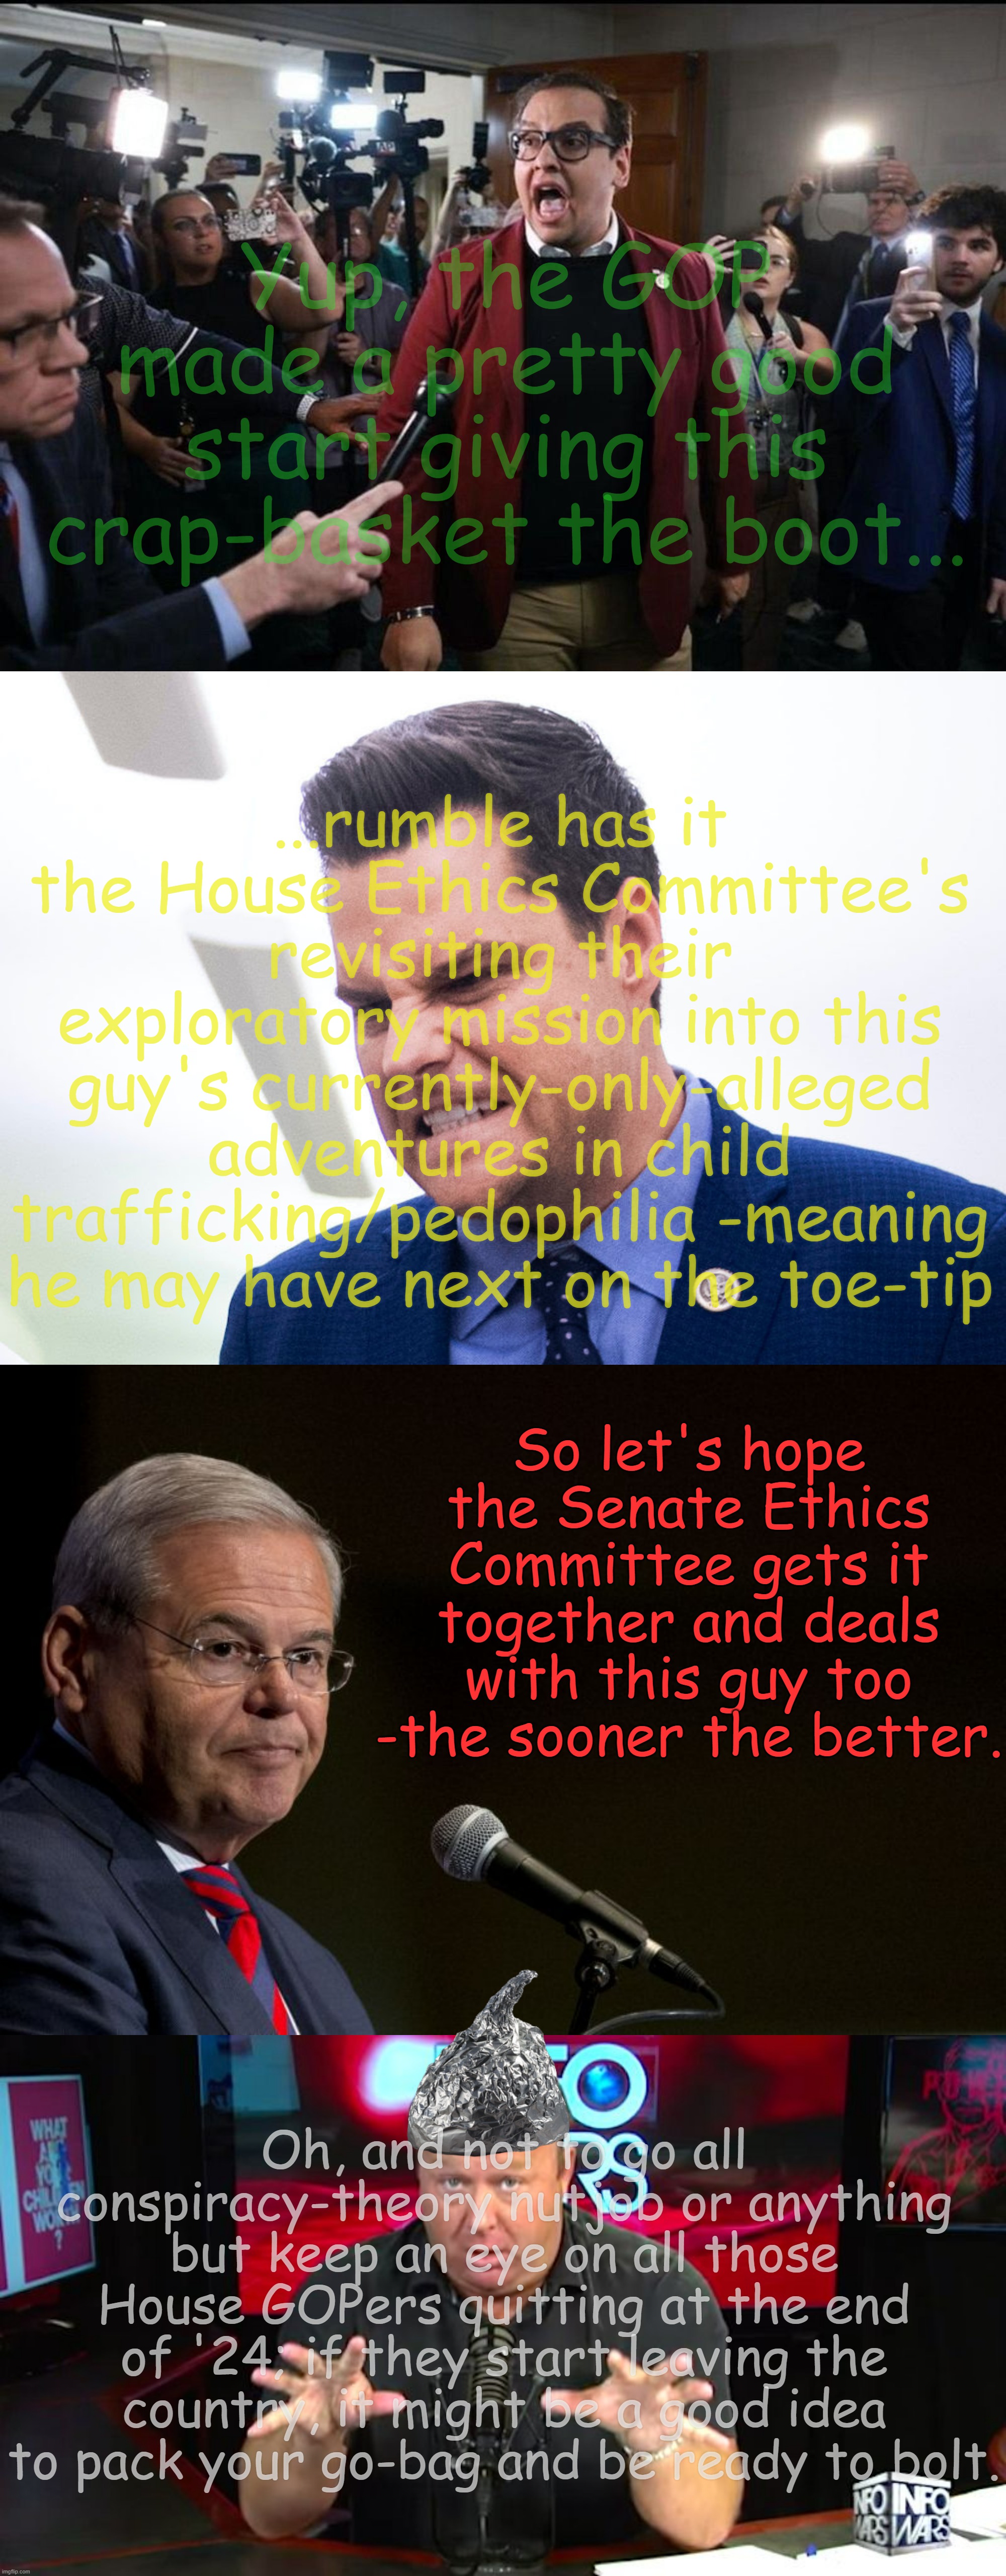 Remember, they've been deep in the enemy's camp... | Yup, the GOP made a pretty good start giving this crap-basket the boot... ...rumble has it the House Ethics Committee's revisiting their exploratory mission into this guy's currently-only-alleged adventures in child trafficking/pedophilia -meaning he may have next on the toe-tip; So let's hope the Senate Ethics Committee gets it together and deals with this guy too -the sooner the better. Oh, and not to go all conspiracy-theory nutjob or anything but keep an eye on all those House GOPers quitting at the end of '24; if they start leaving the country, it might be a good idea to pack your go-bag and be ready to bolt. | image tagged in george santos,matt gaetz,senator bob menendez,alex jones | made w/ Imgflip meme maker